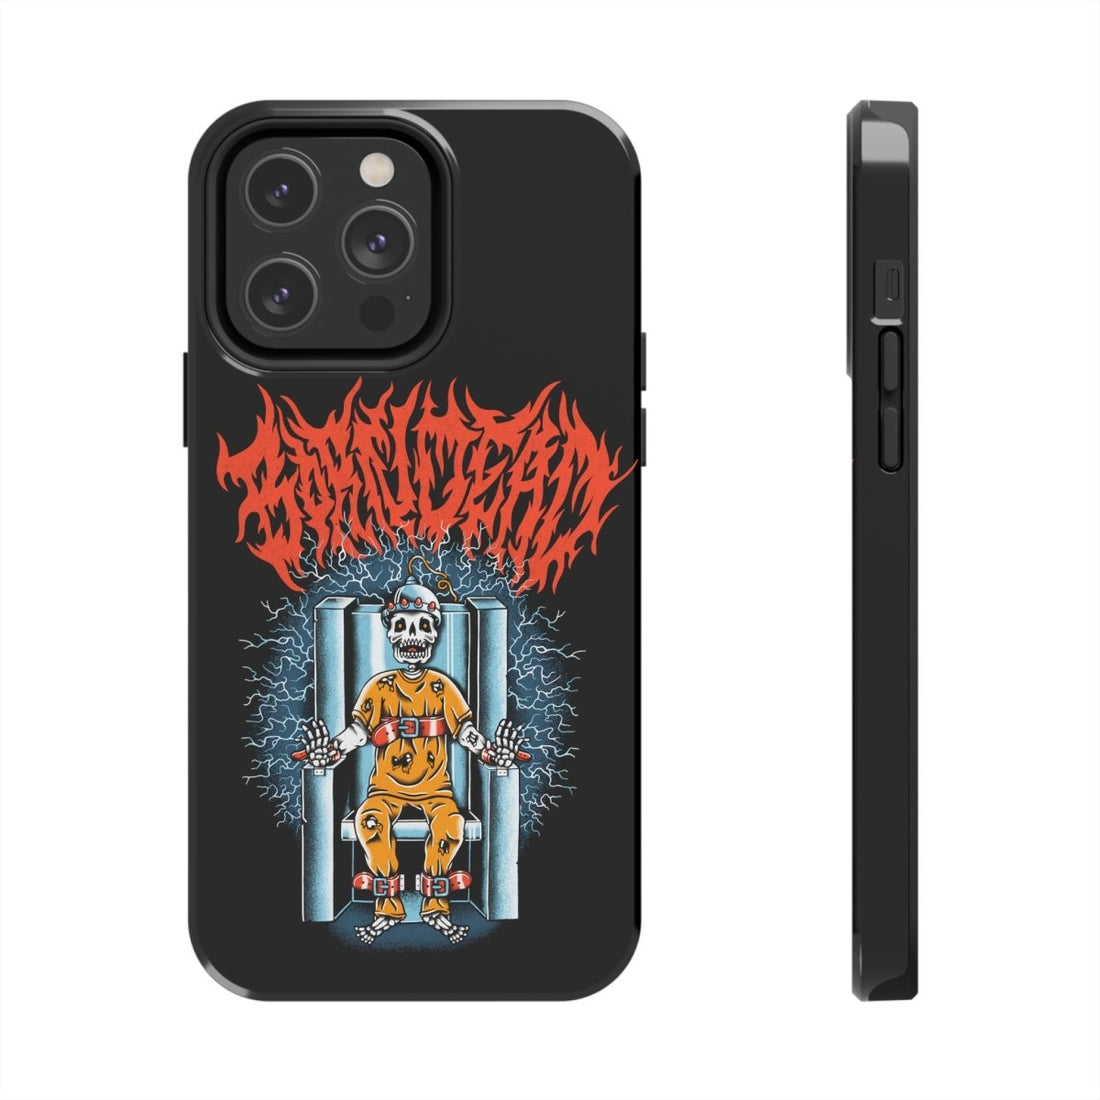 Anything To Numb Tattoo Inspired Tough Phone Cases